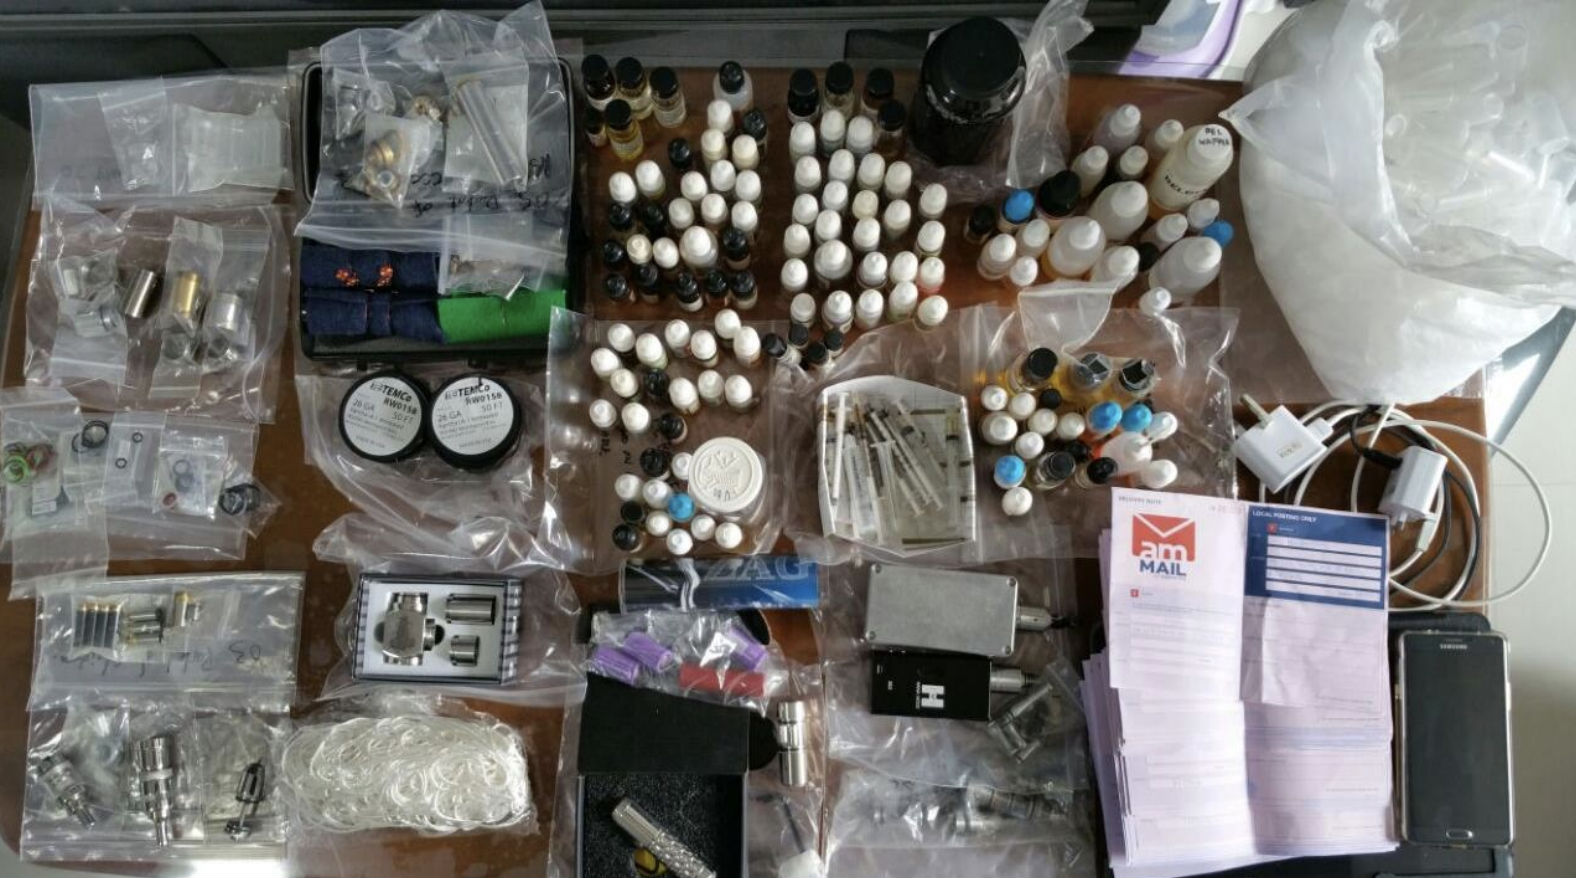 Photo of electronic vaporizers and paraphernalia found at Chong Weisheng’s home. Photo: Health Sciences Authority